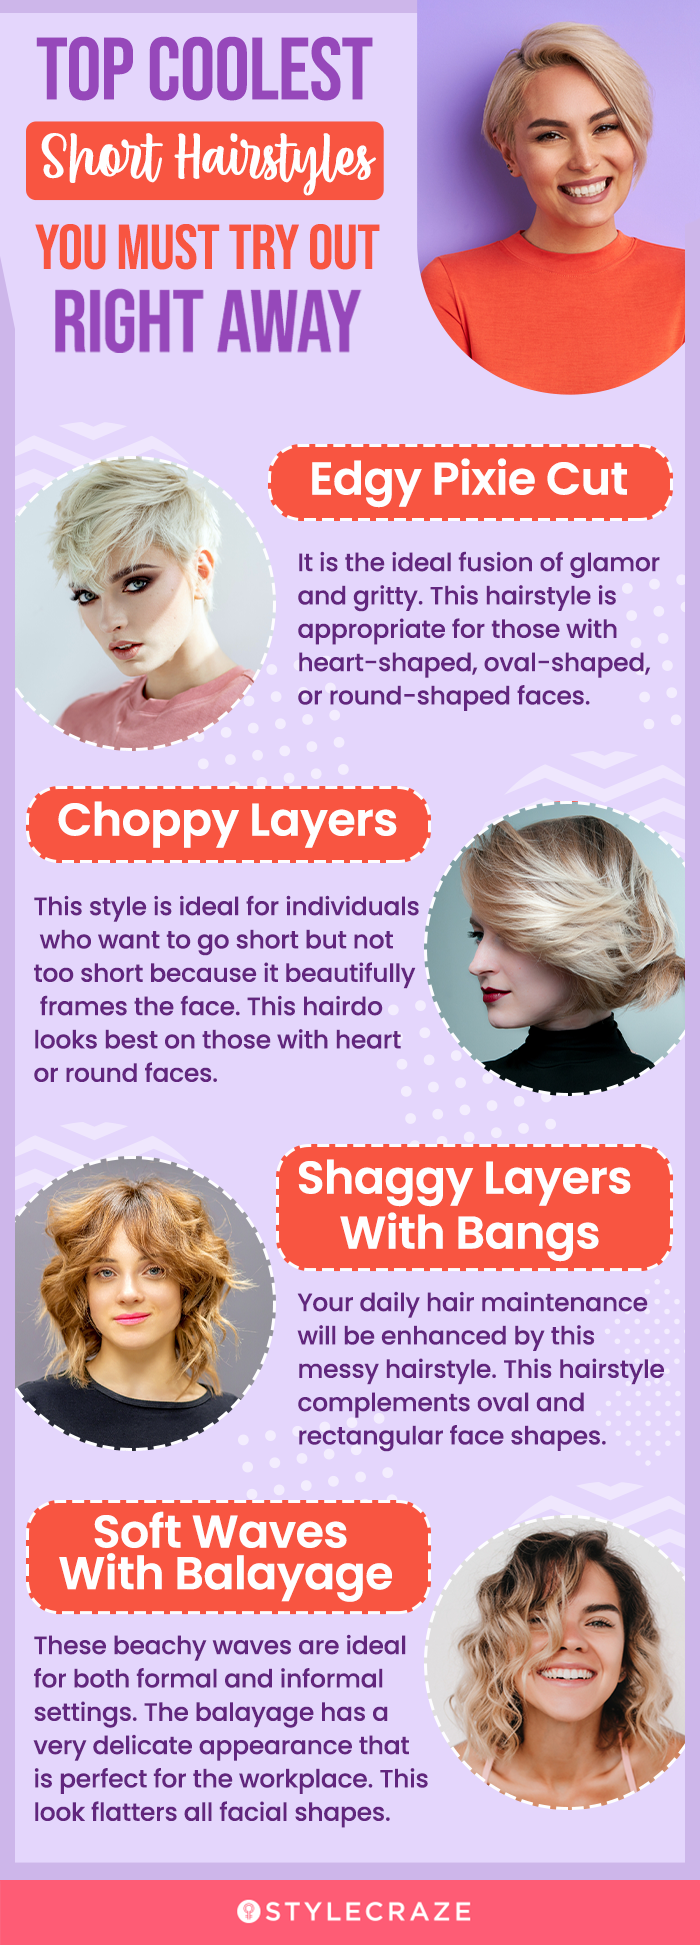 top coolest short hairstyles you must try out right away [infographic]